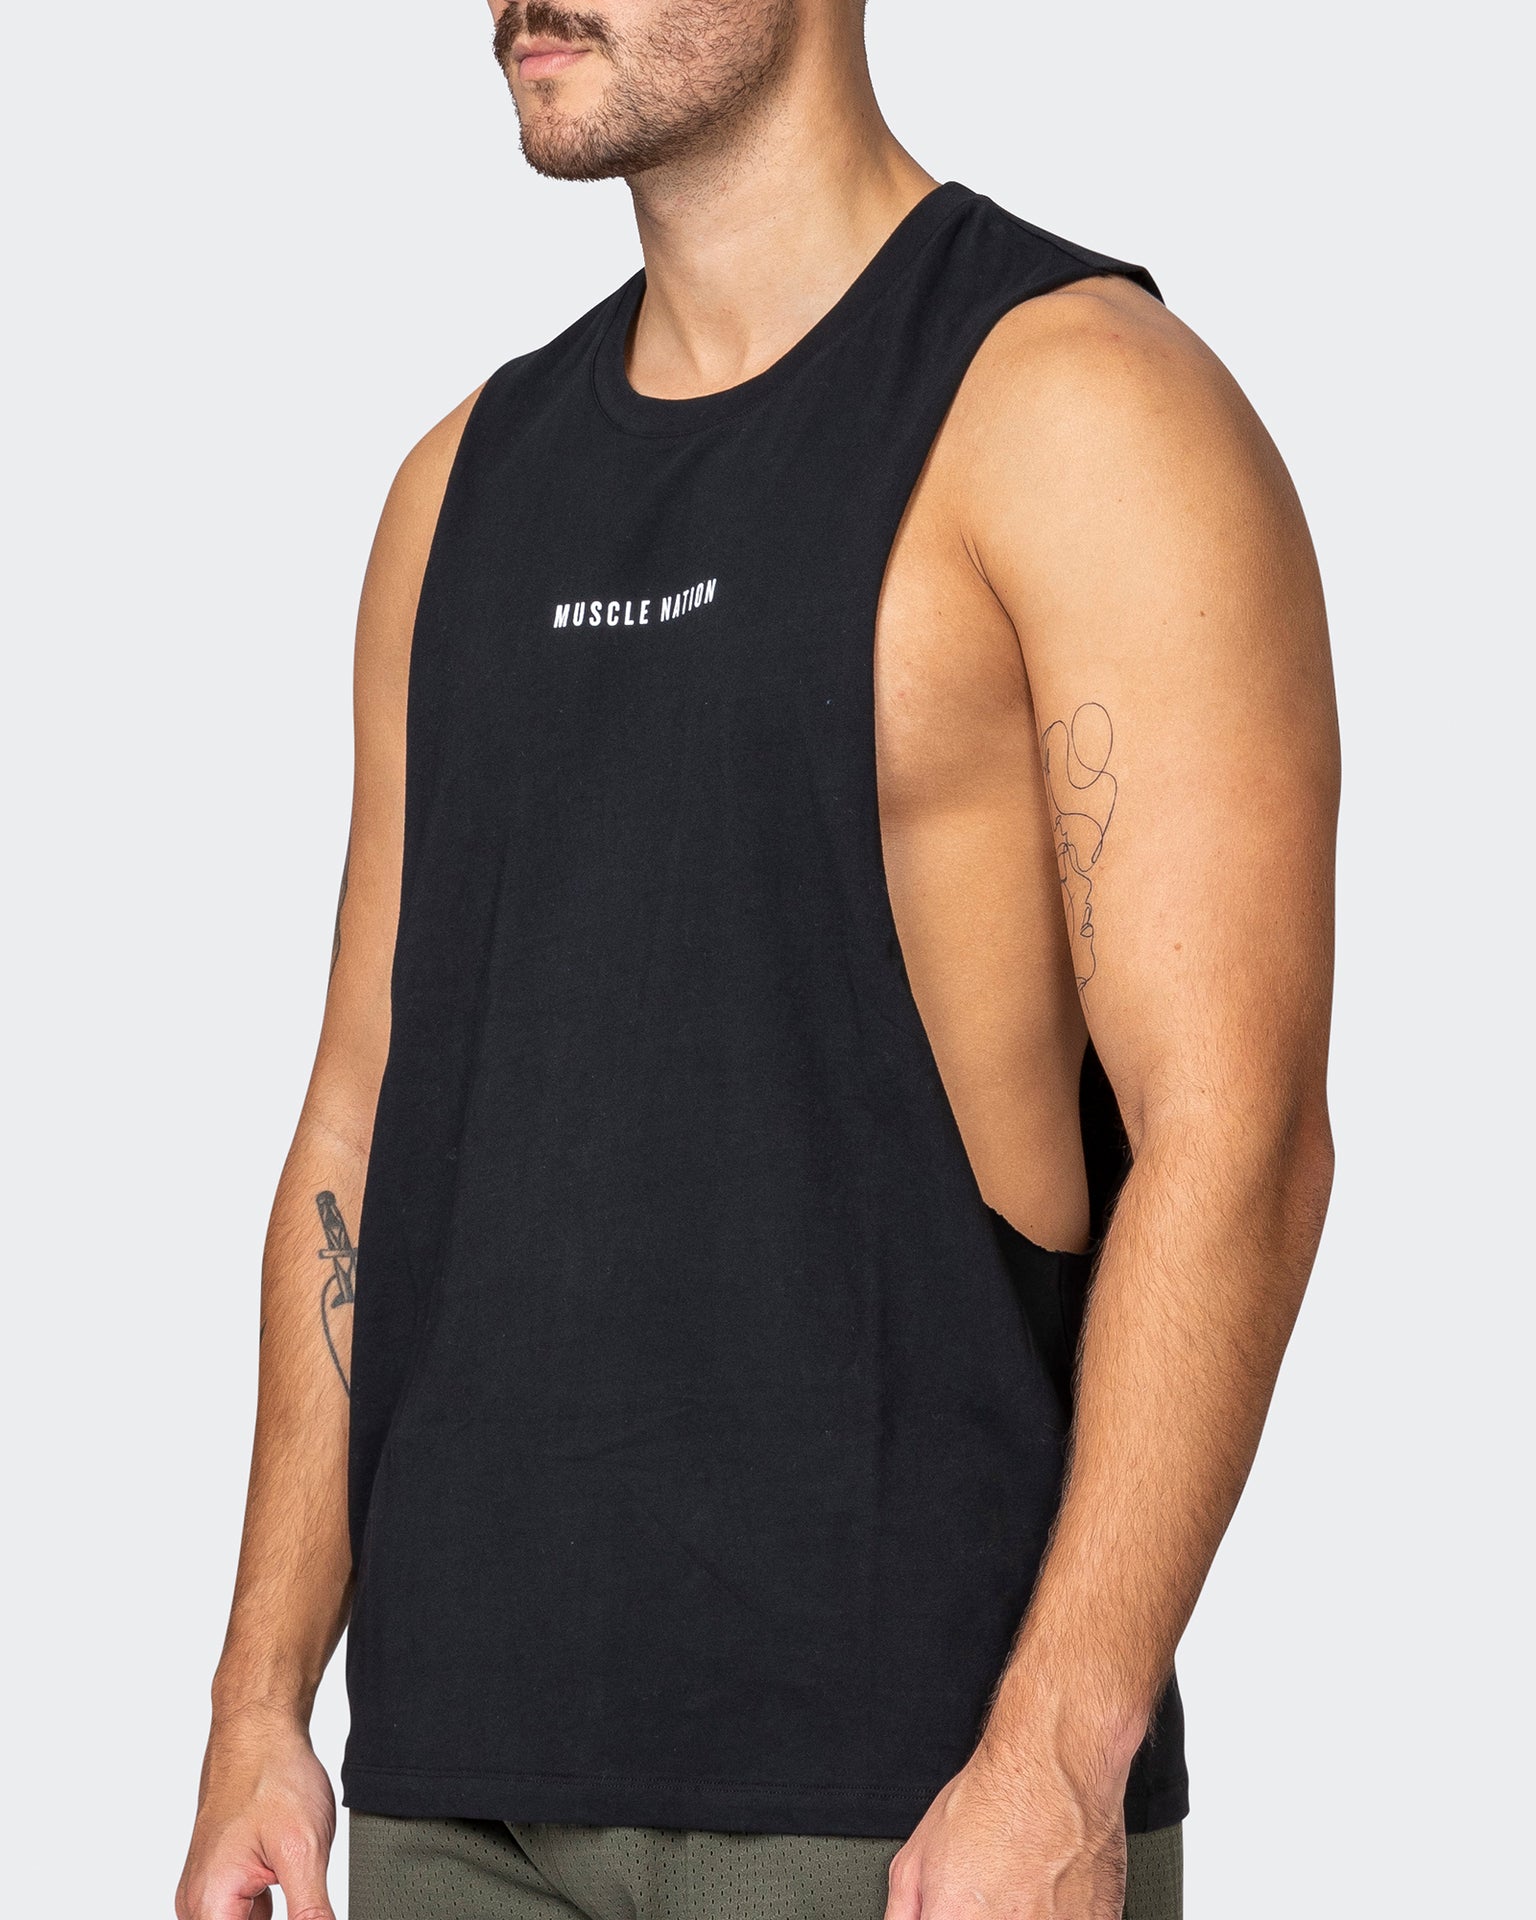 Sold Out! The Drop Arm Black Muscle Tank with White Ink with the